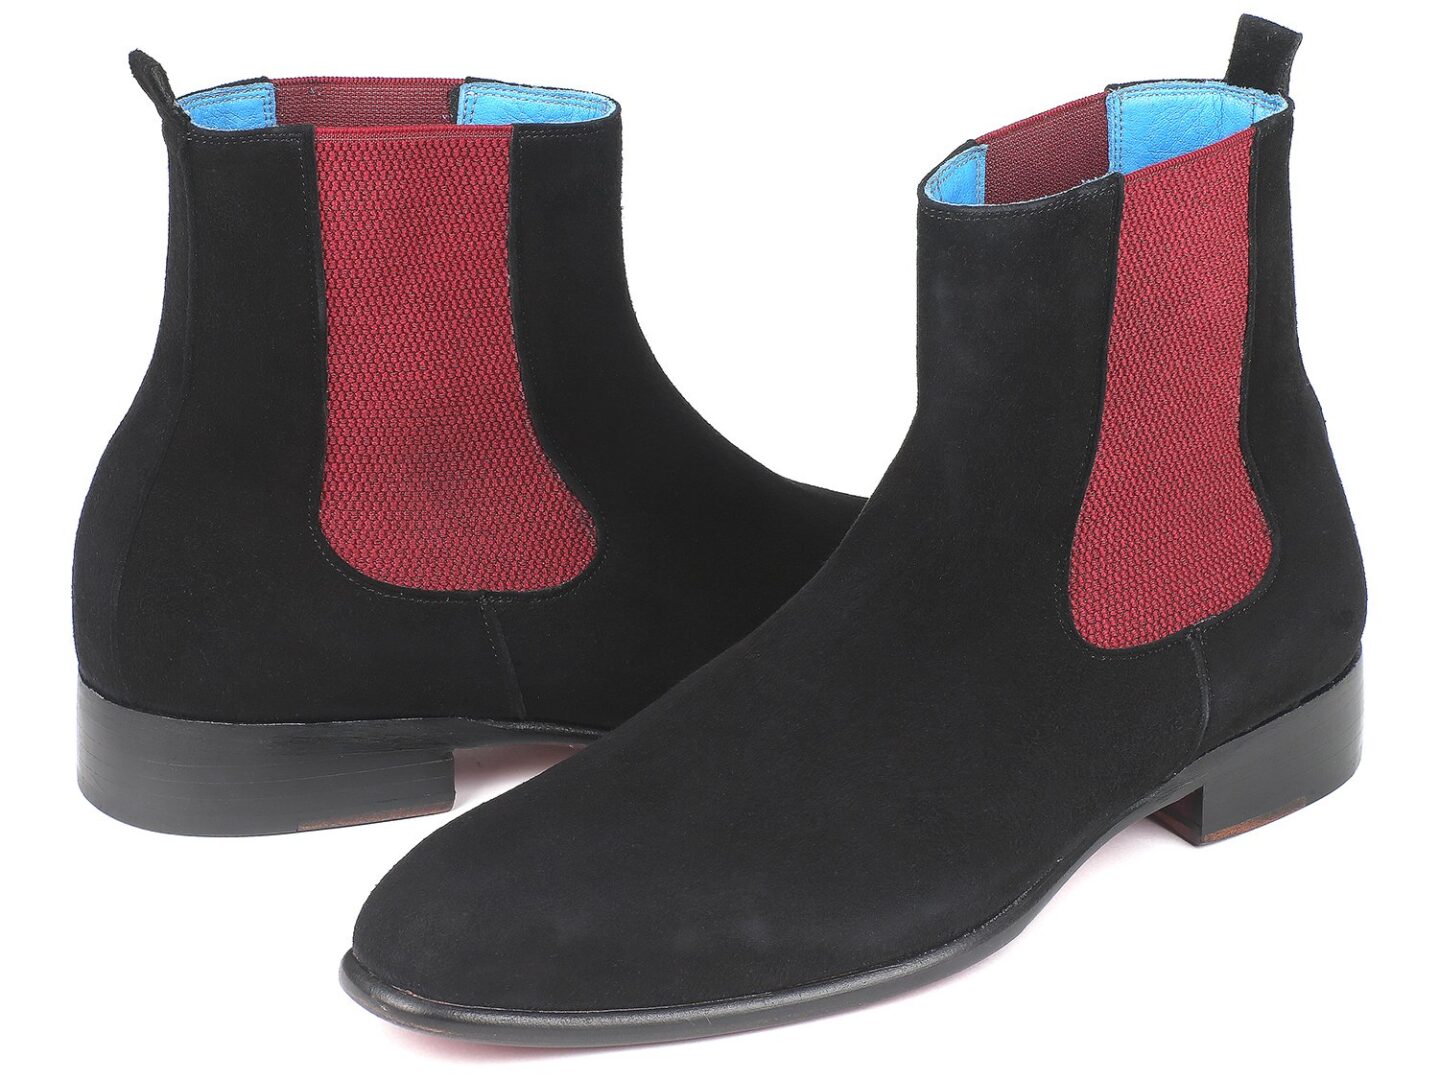 Paul Parkman Navy Suede Chelsea Boots, black with red sides